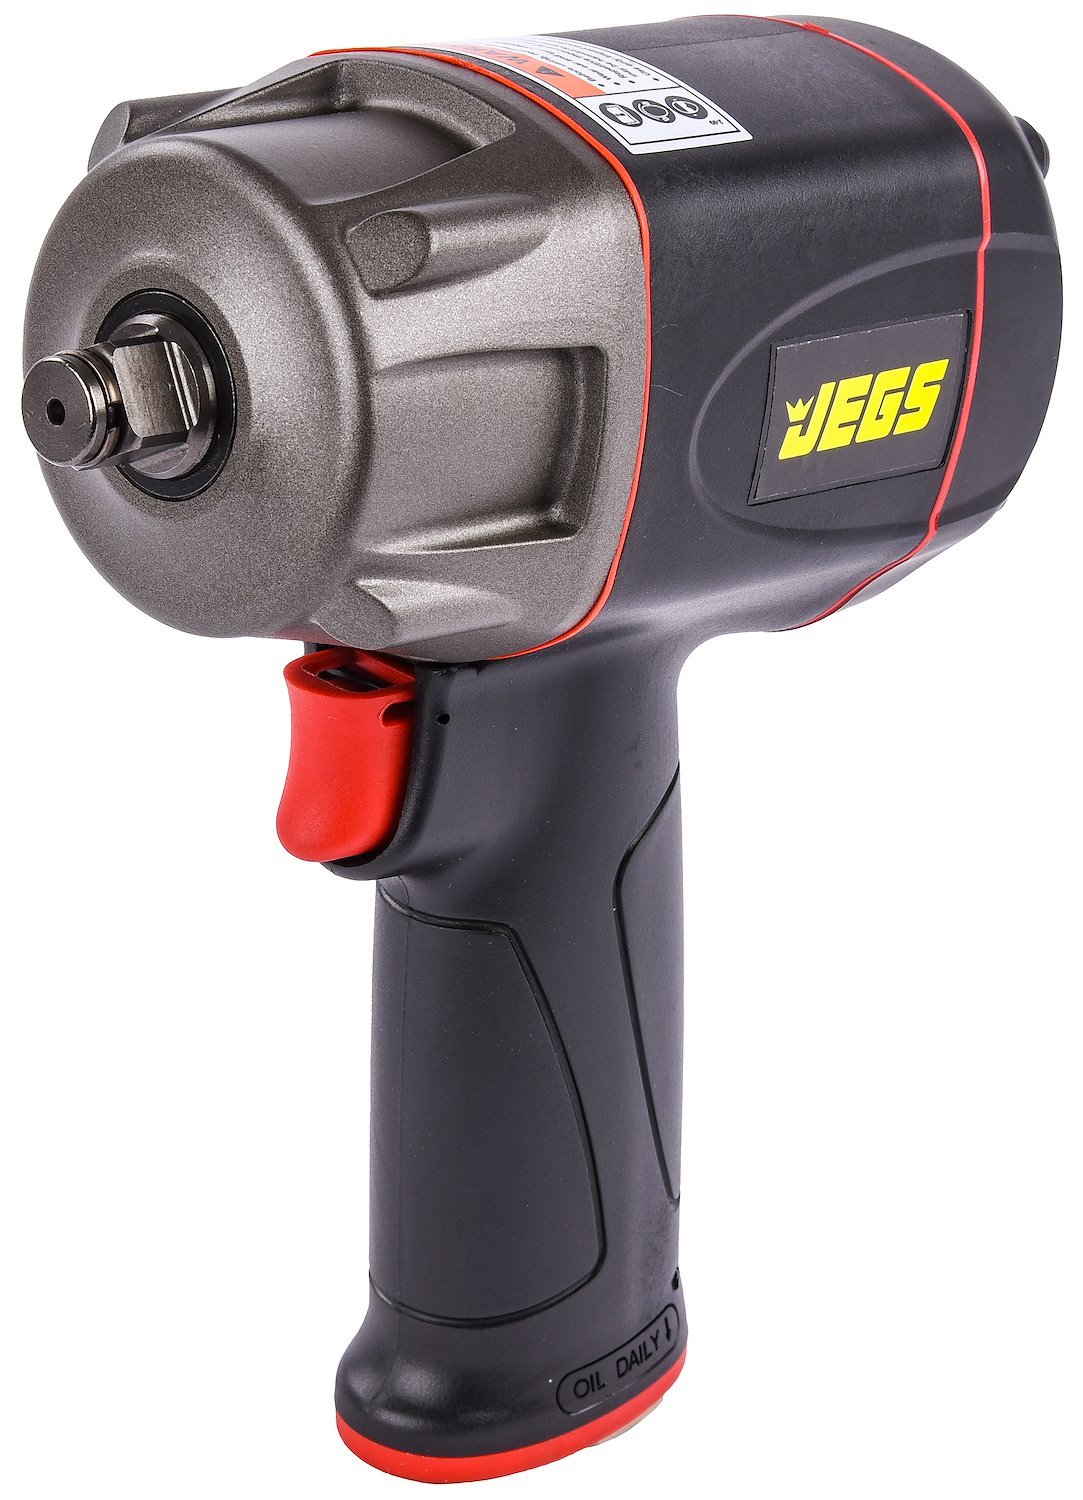 Reversible Air Impact Wrench [1/2 in. Drive, 1000 ft.-lbs. Torque]